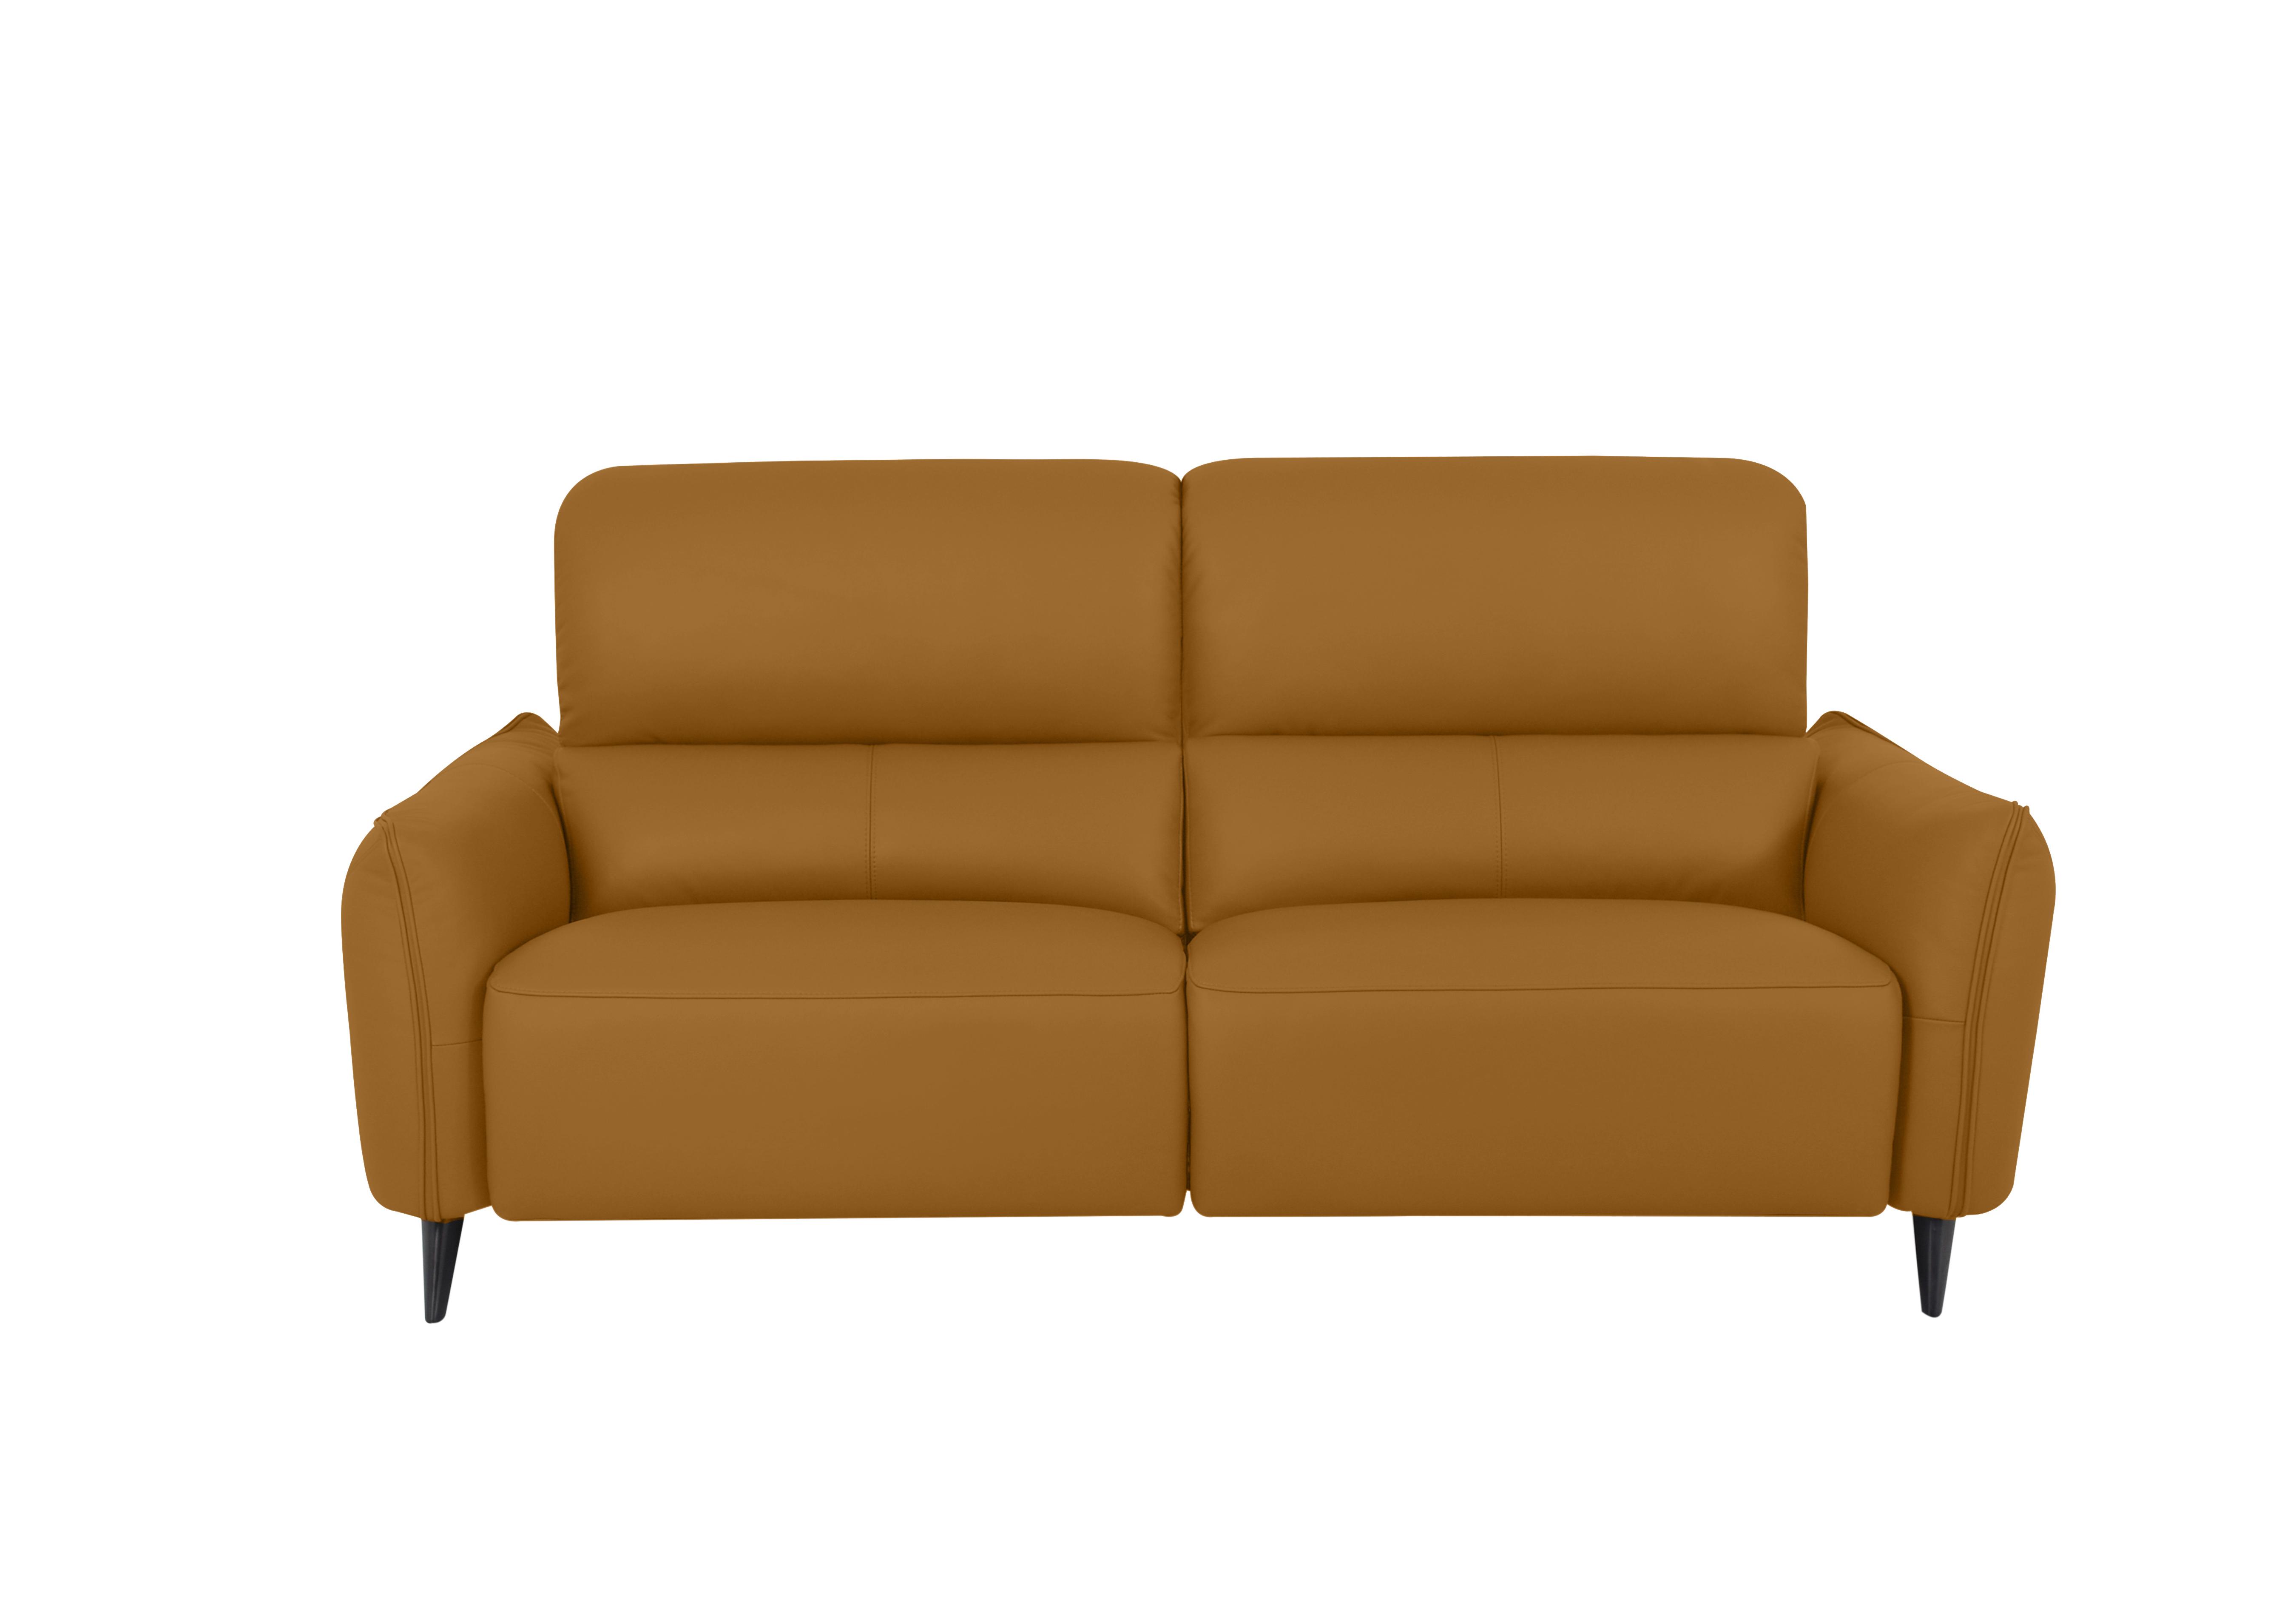 Maddox 3 Seater Leather Sofa in Np-606e Honey Yellow on Furniture Village